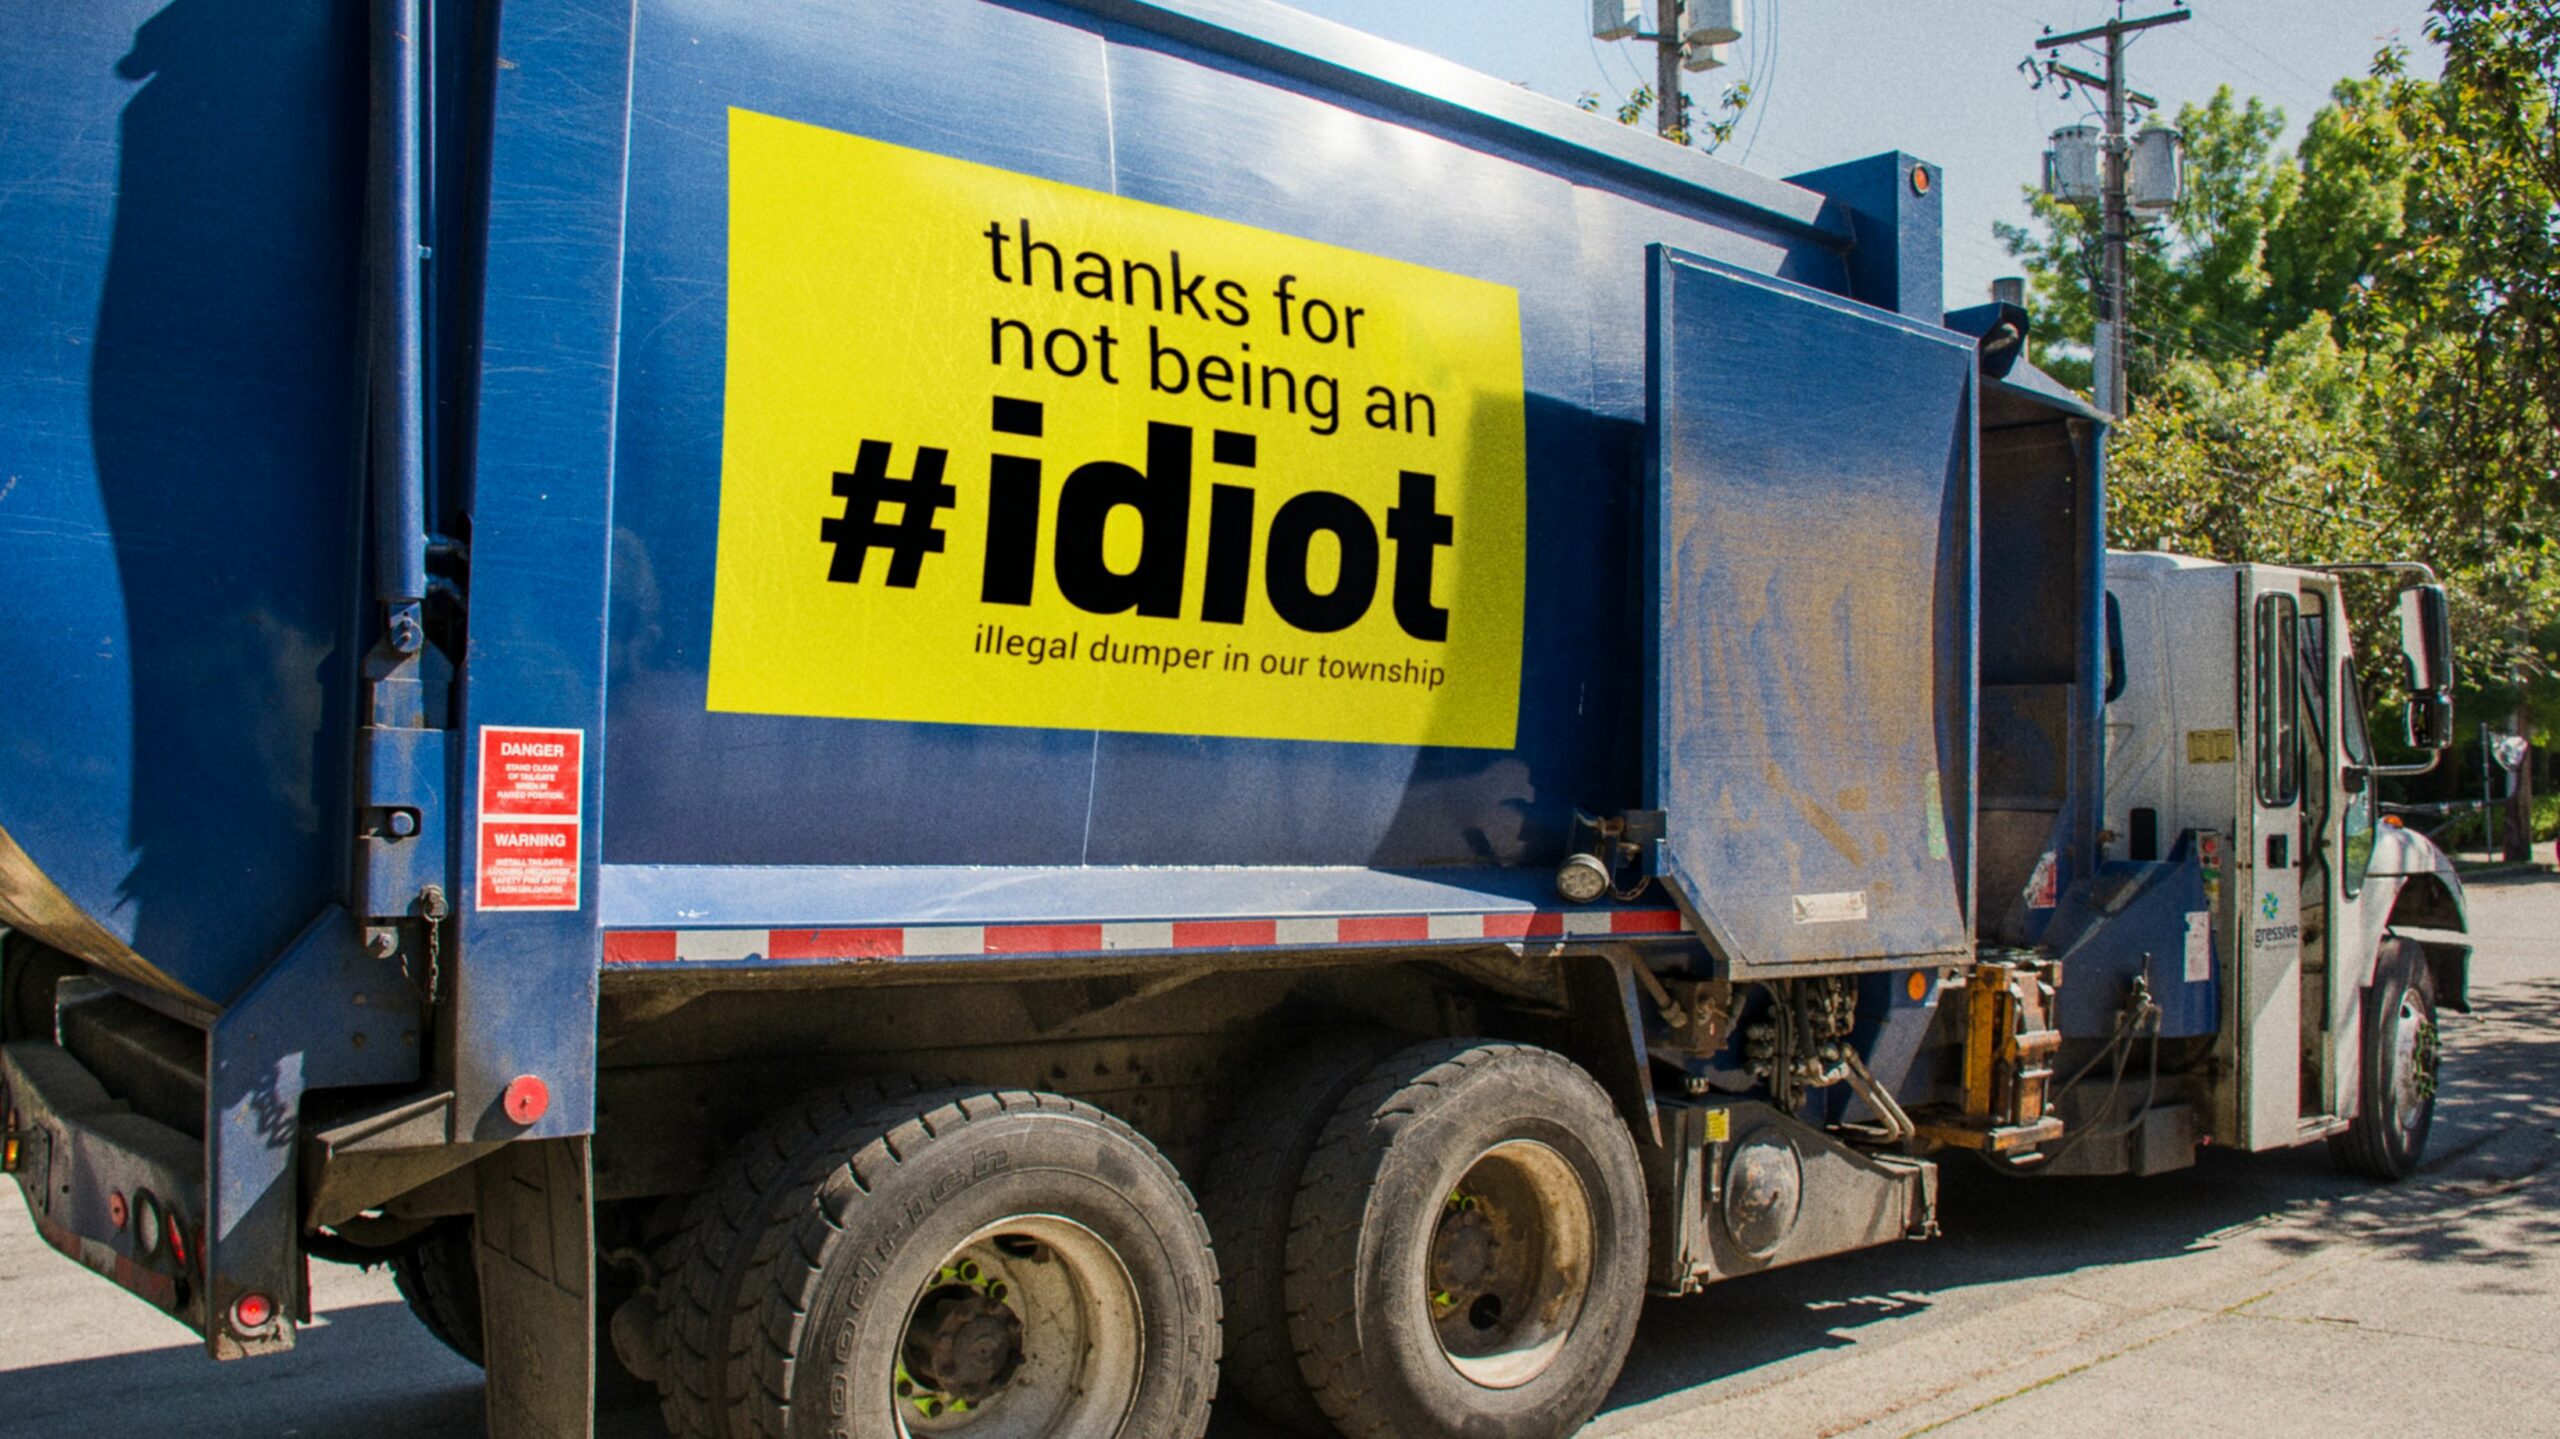 IDIOT: Illegal Dumper in Our Township ad on garbage truck